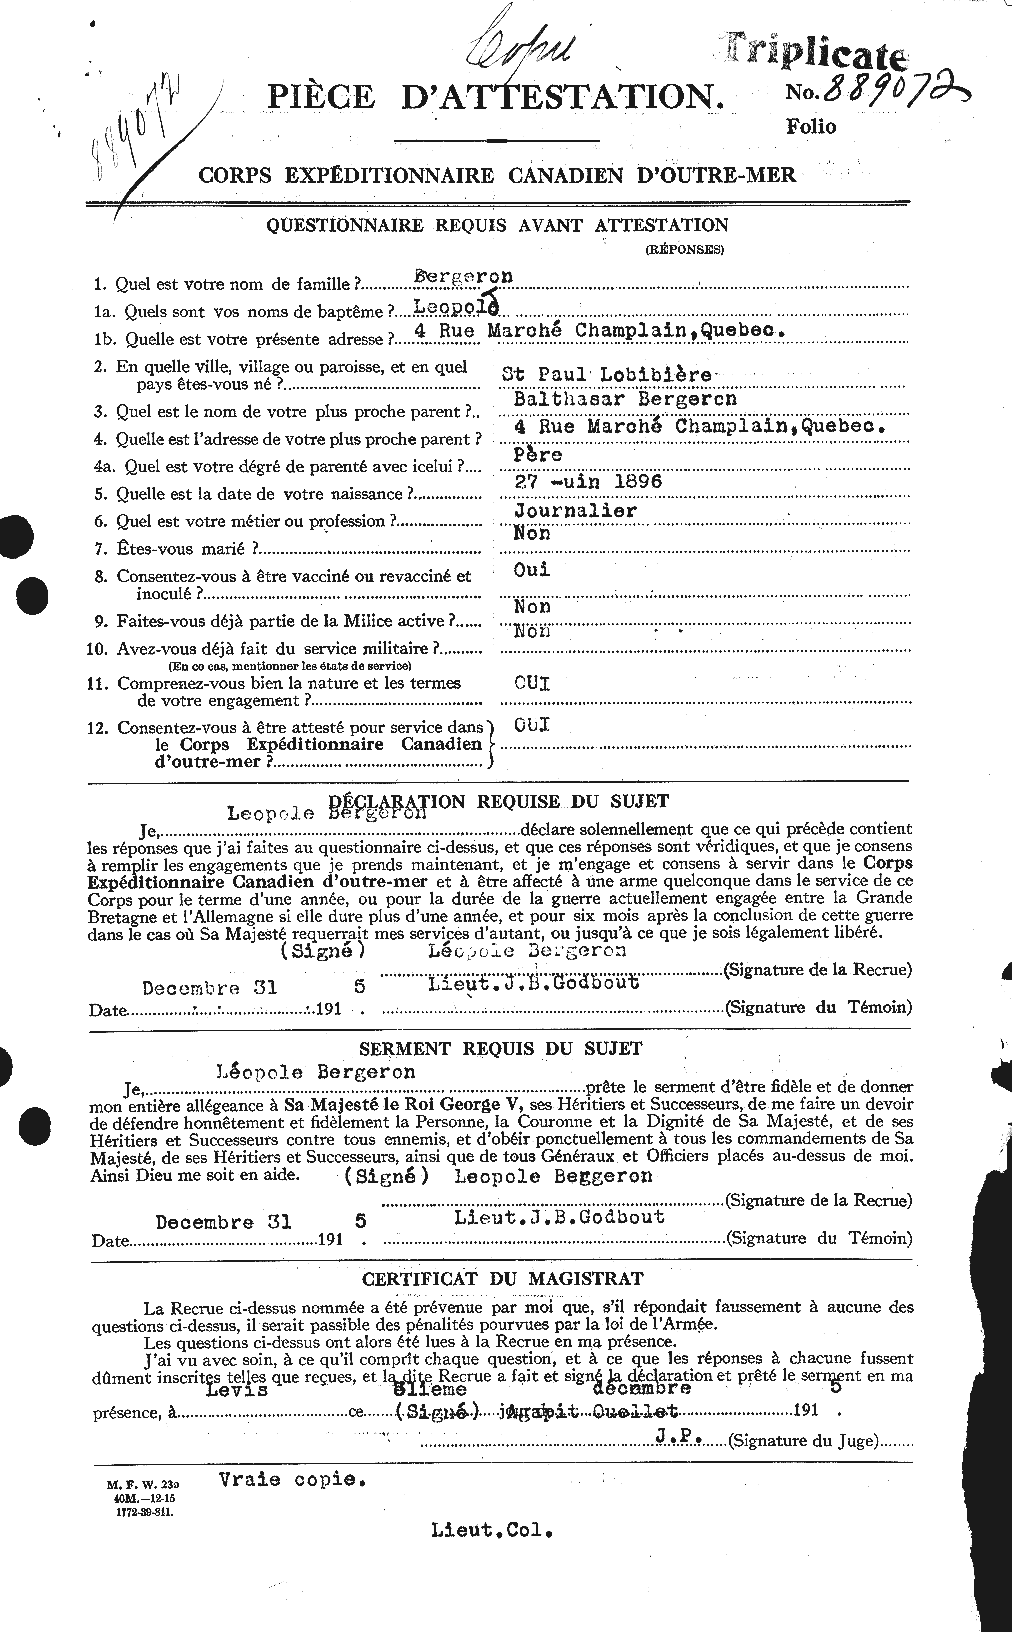 Personnel Records of the First World War - CEF 232964a